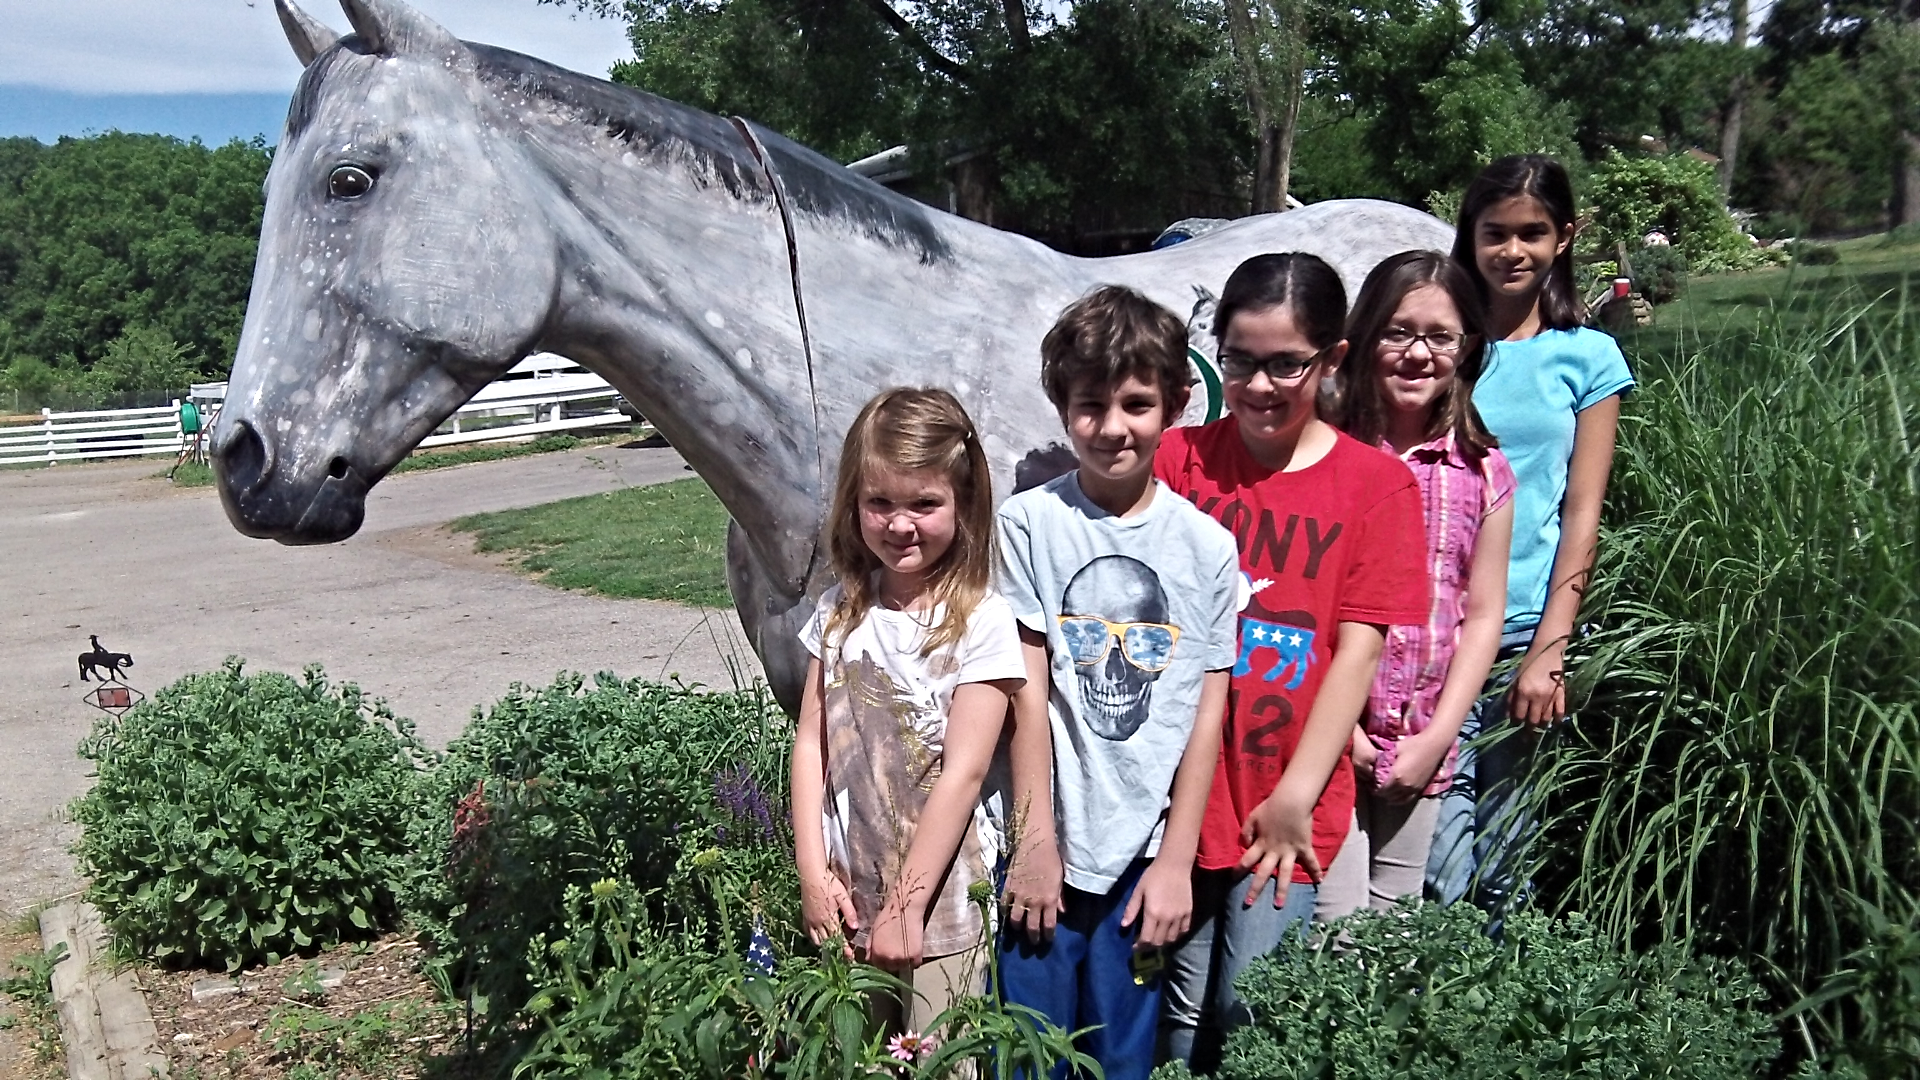 5 children standing in front of a horse statue.